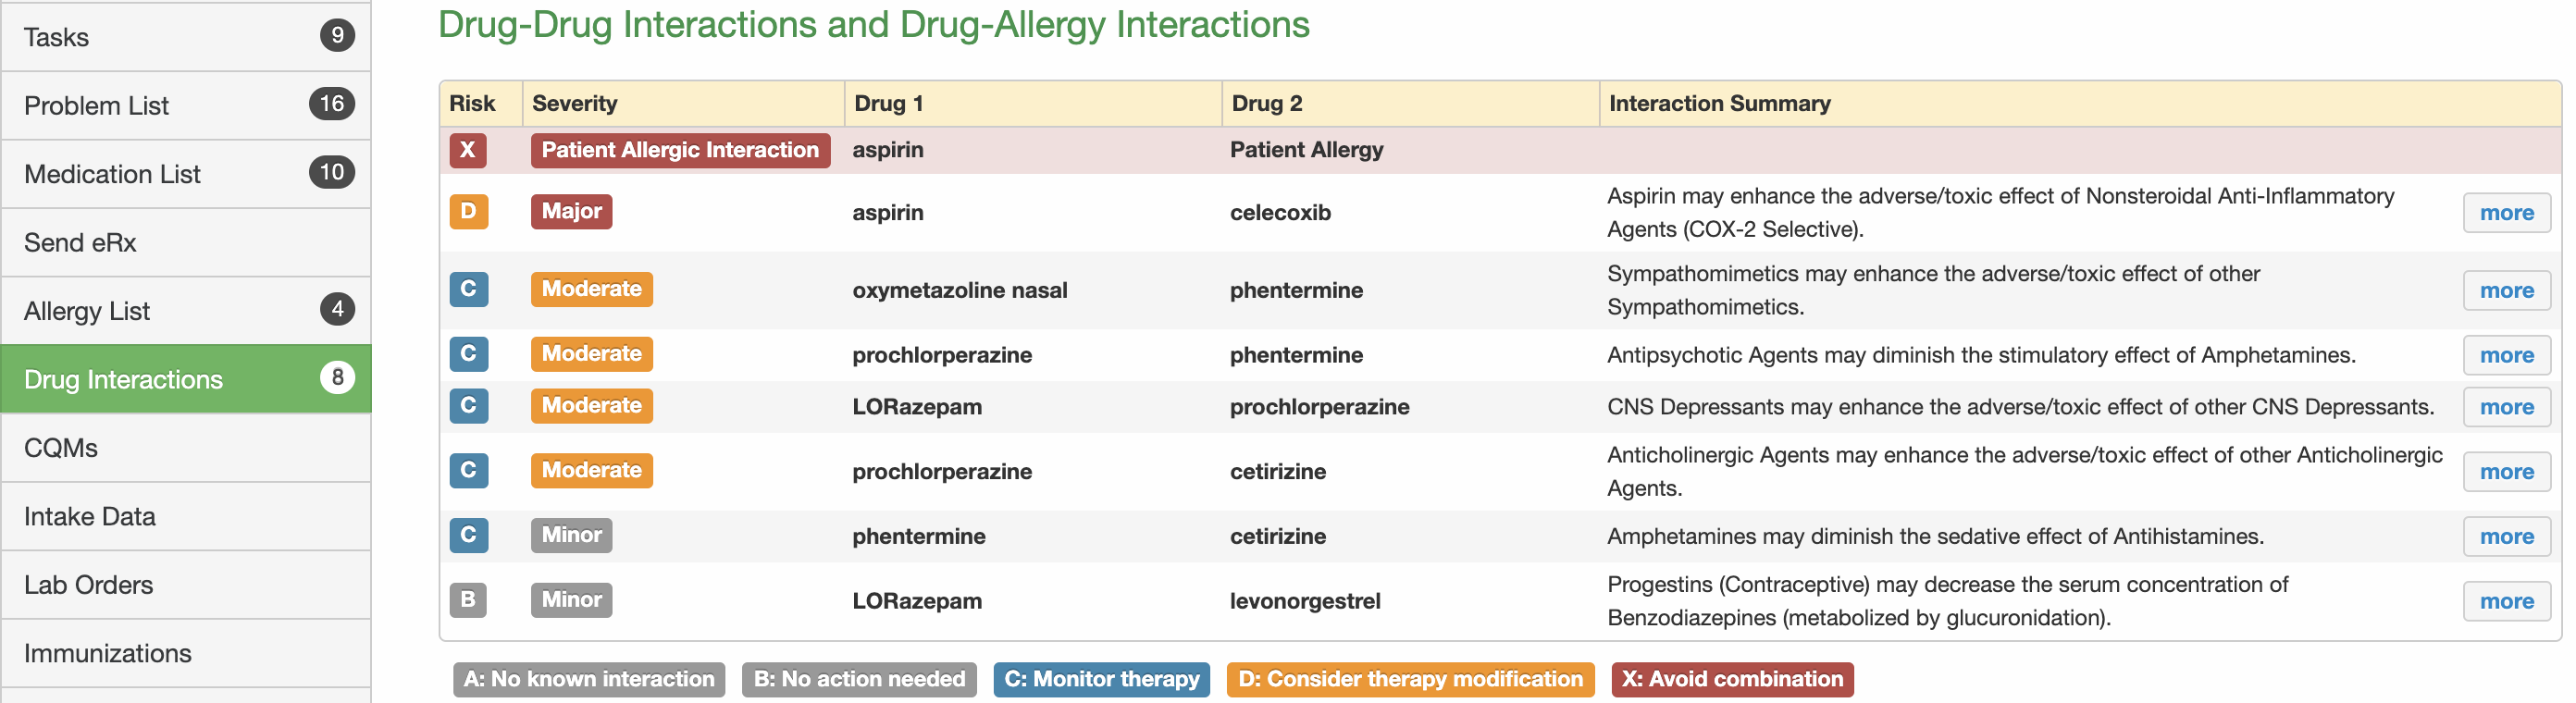 Drug_Interactions_Check_Chart.png